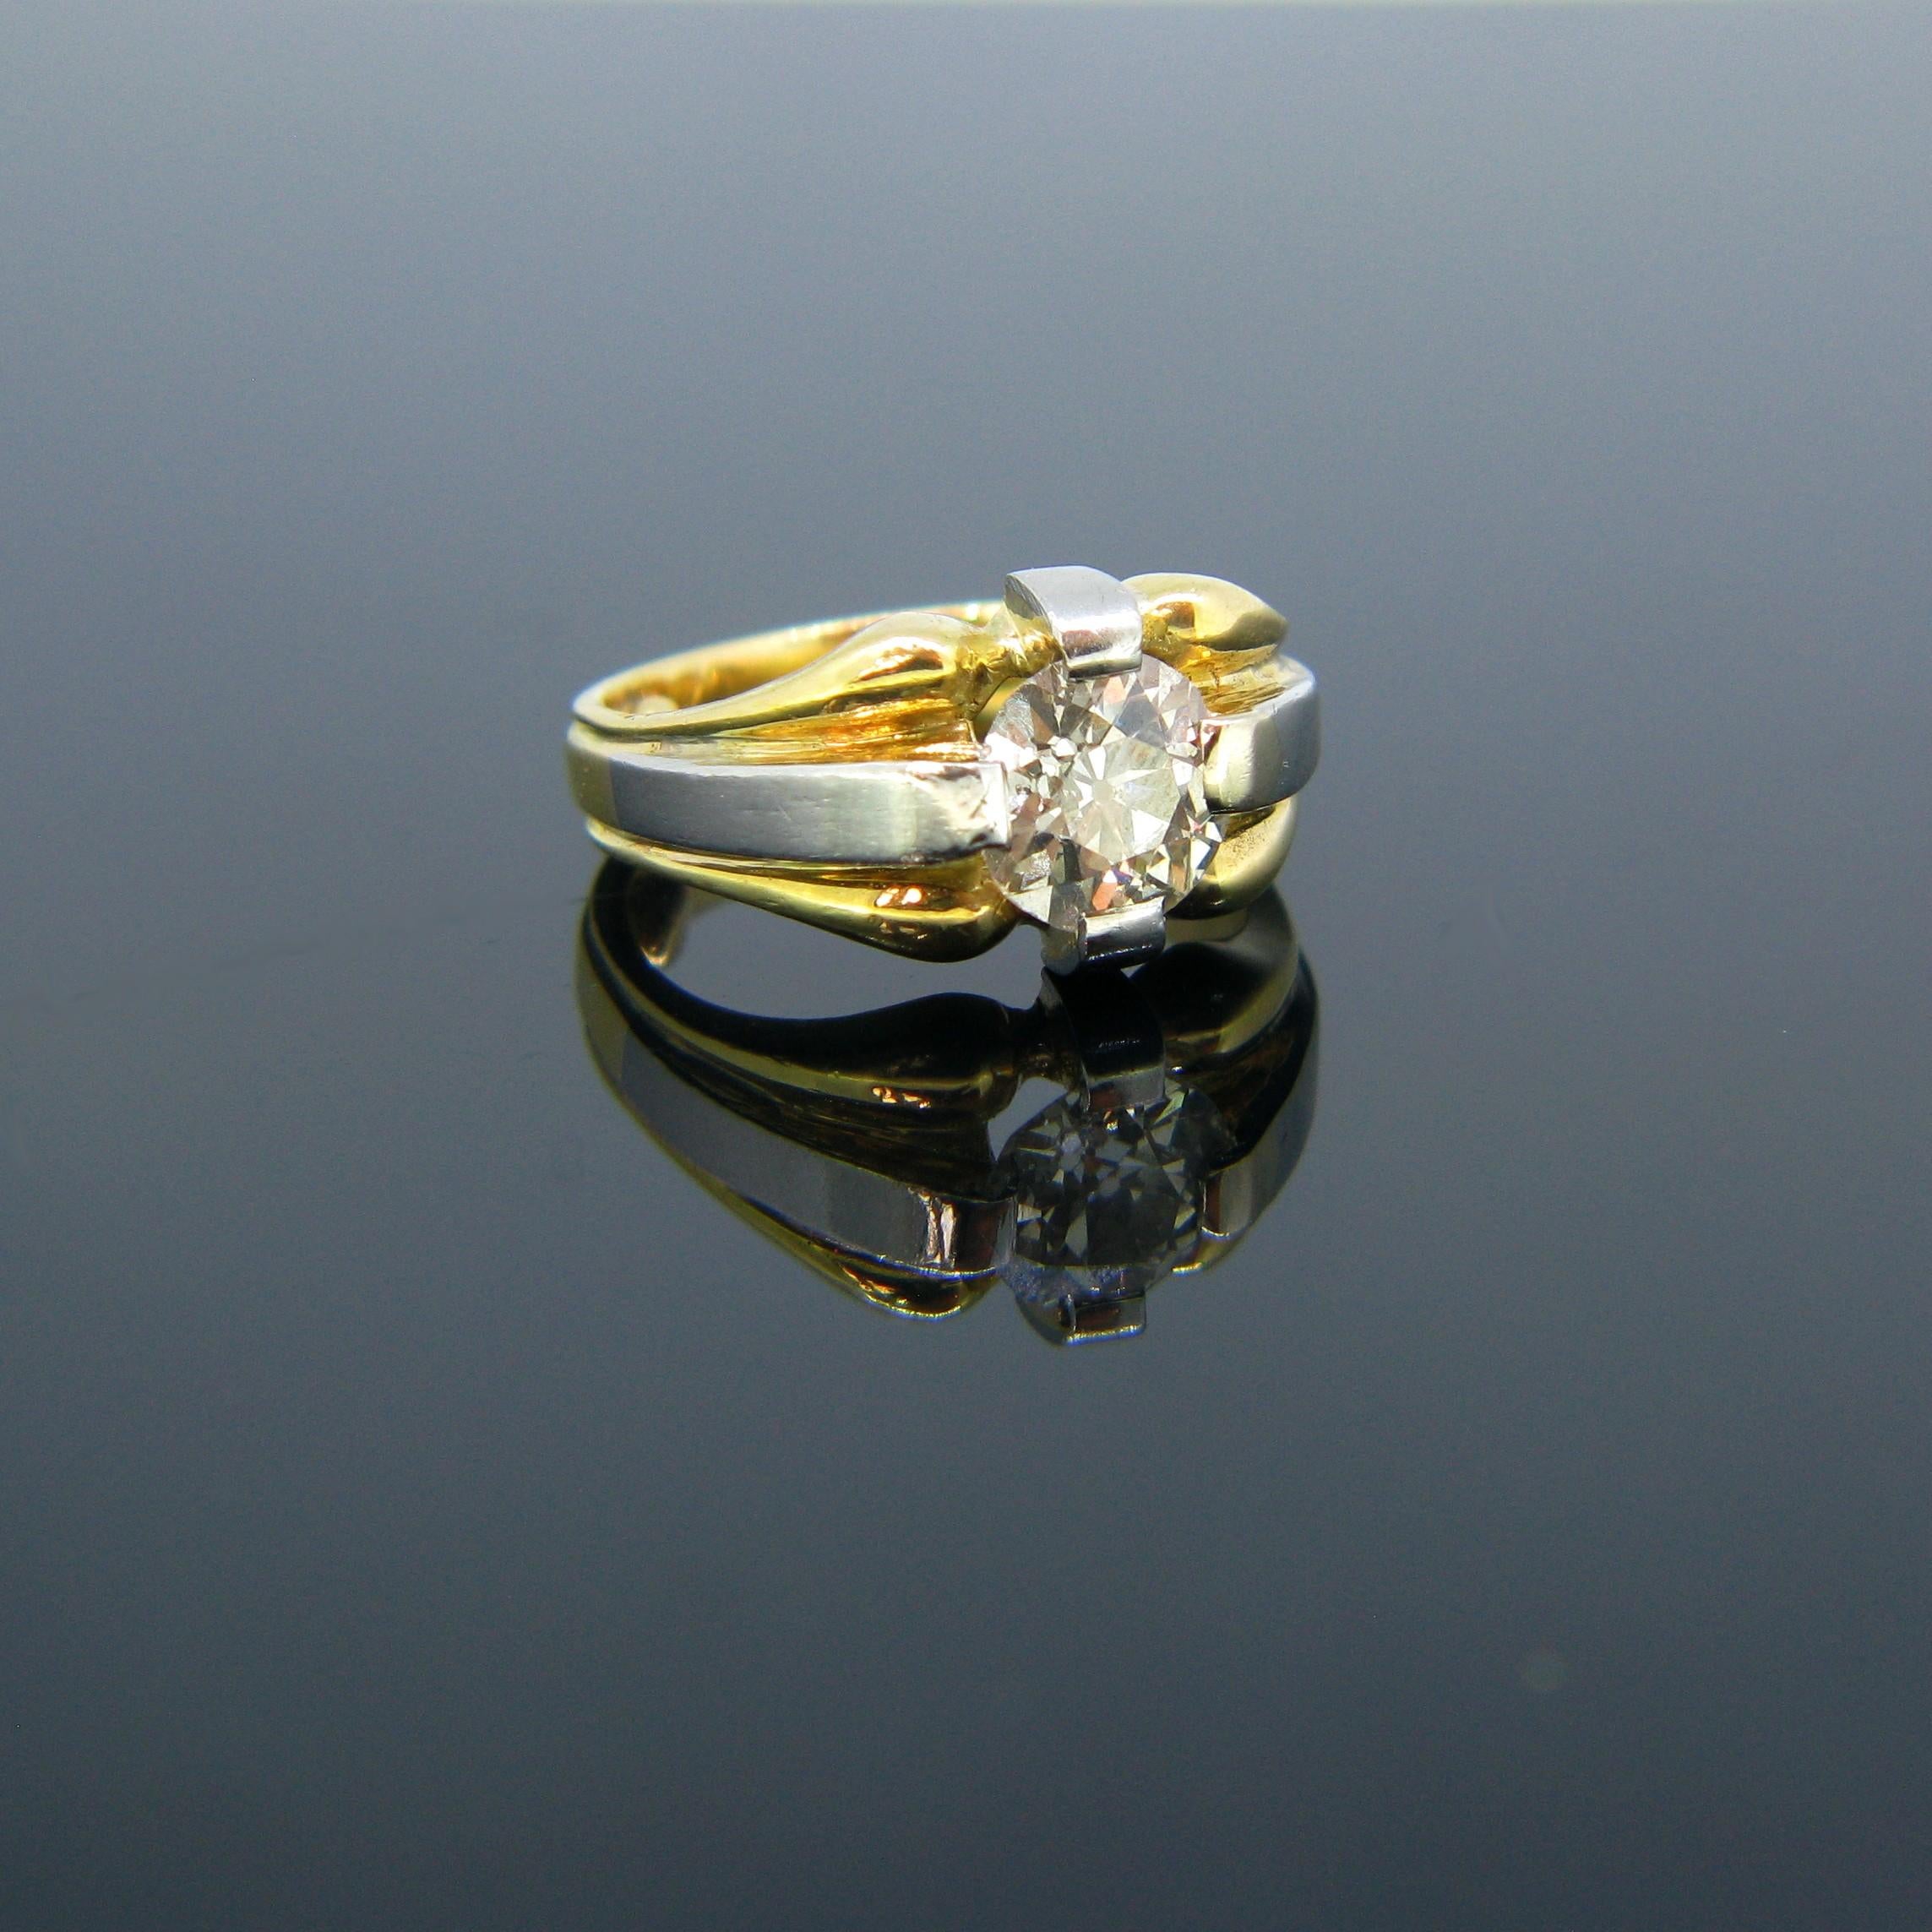 This retro diamond ring is made is 18kt yellow gold and platinum. It features an old mine cut diamond weighing around 1.80ct. It is marked with the French eagle’s head. The diamond is set in platinum prongs.

Weight: 12.1gr

Metal: 18kt Yellow